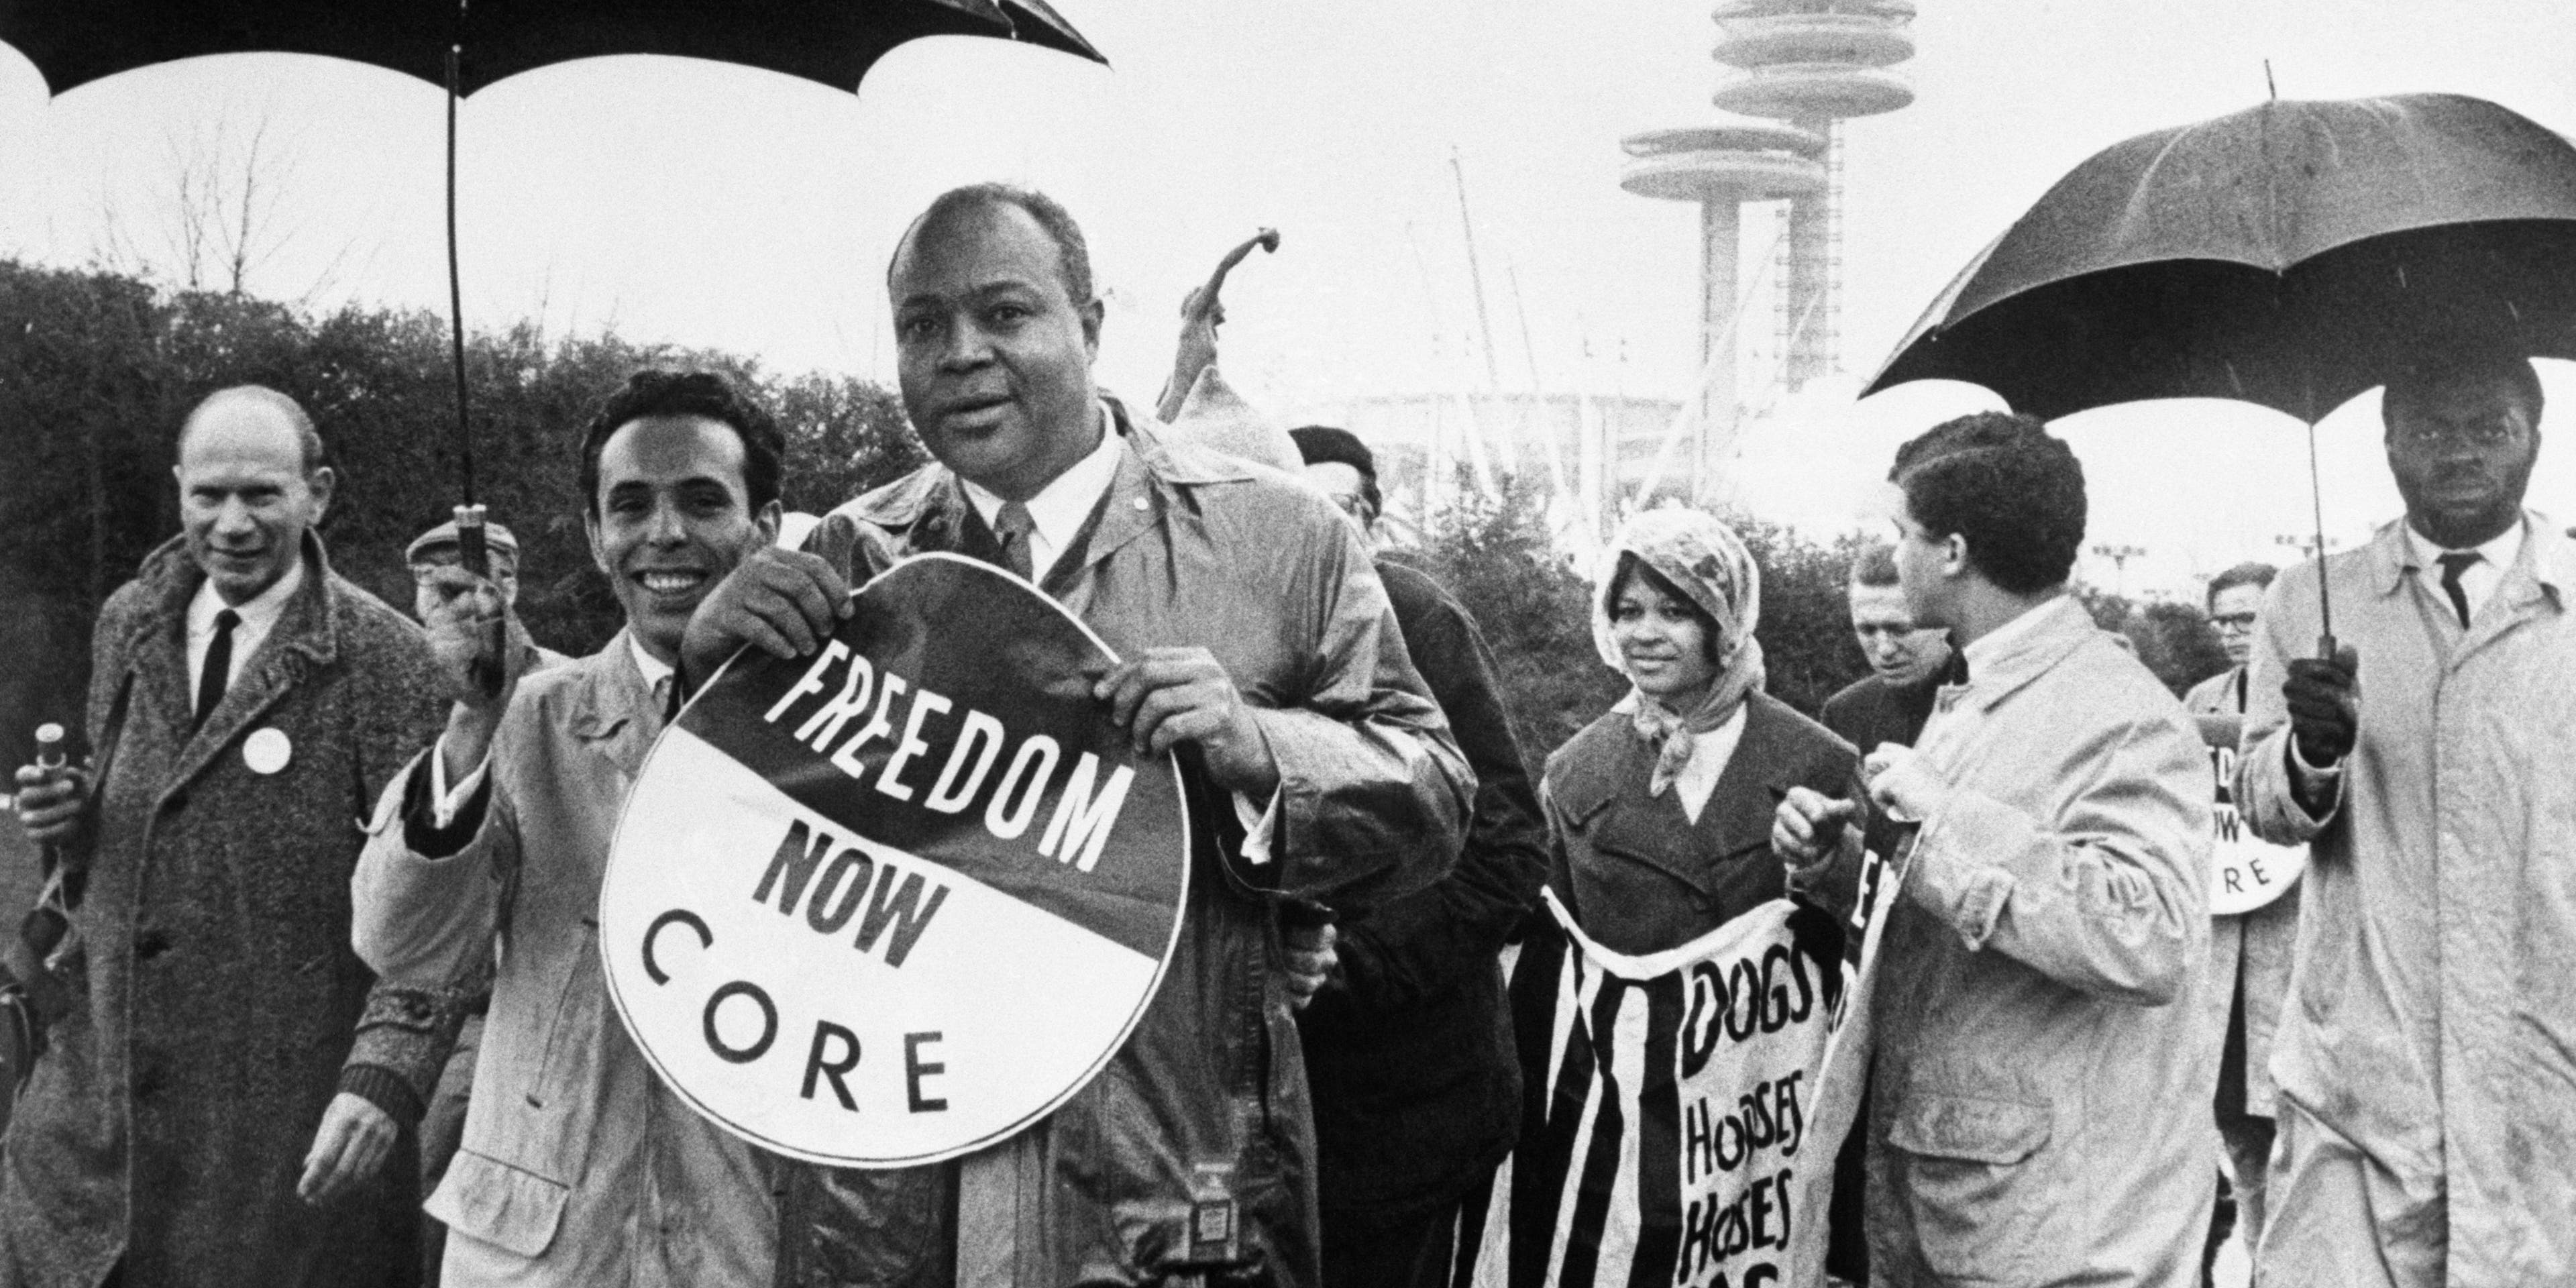 James Farmer, national director of the Congress of Racial Equality, holds a large sign as he leads a CORE demonstration during opening day ceremonies at the World's Fair. In the background is the New York State Pavilion.